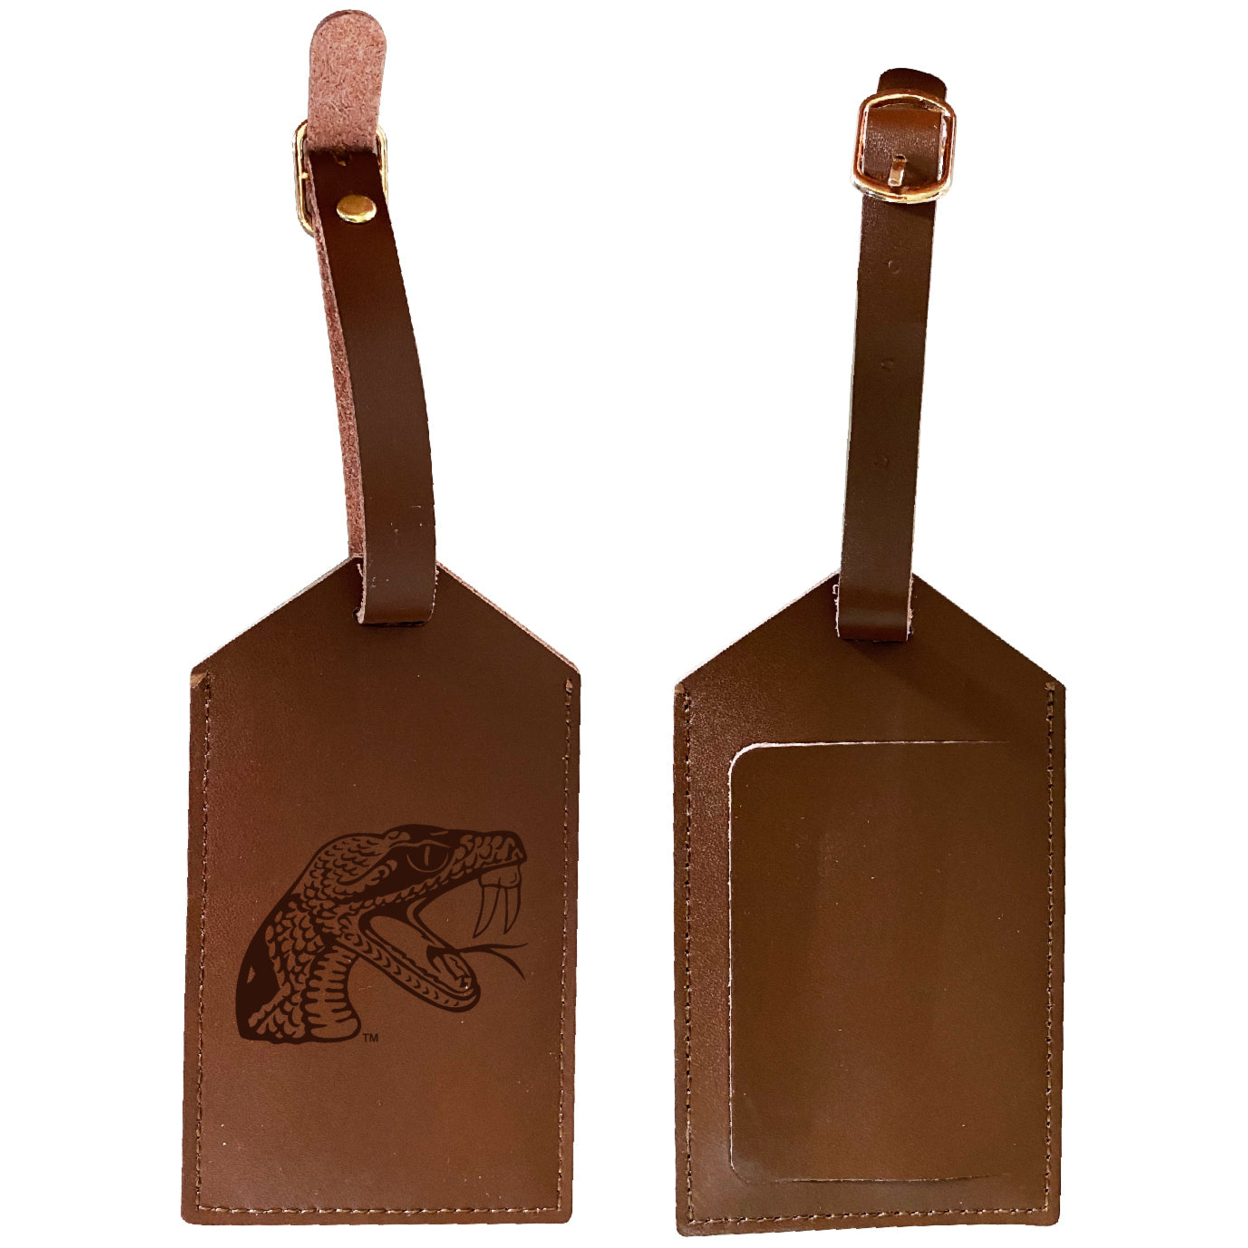 Florida A&M Rattlers Leather Luggage Tag Engraved